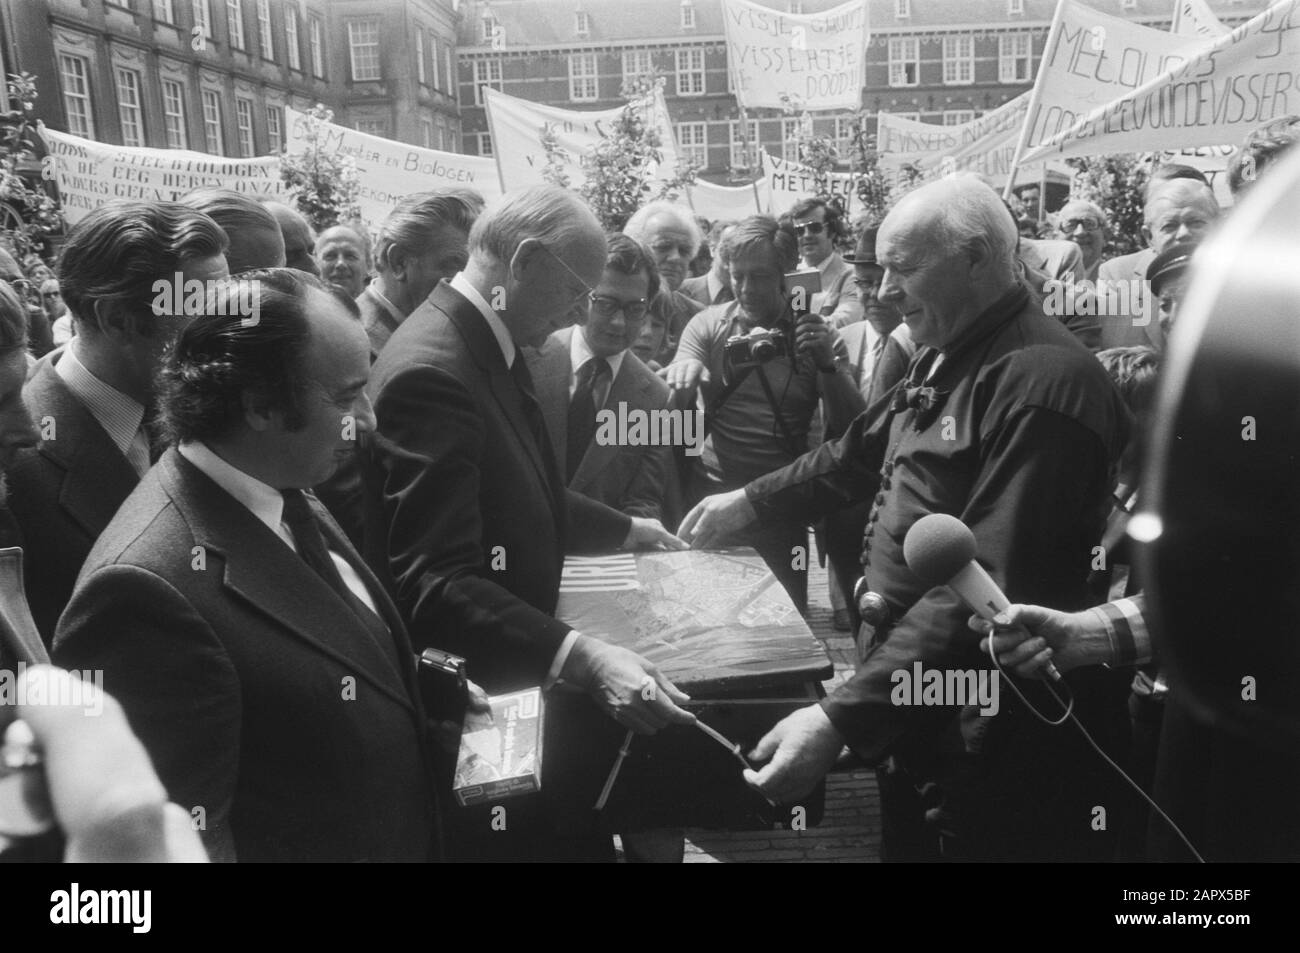 Protest sea fishermen against odds and catch distribution, Vondeling gets on Binnenhof casket haddock offered, left front Roels of the PVDA Date: May 10, 1976 Keywords: offers, crates, protests Stock Photo